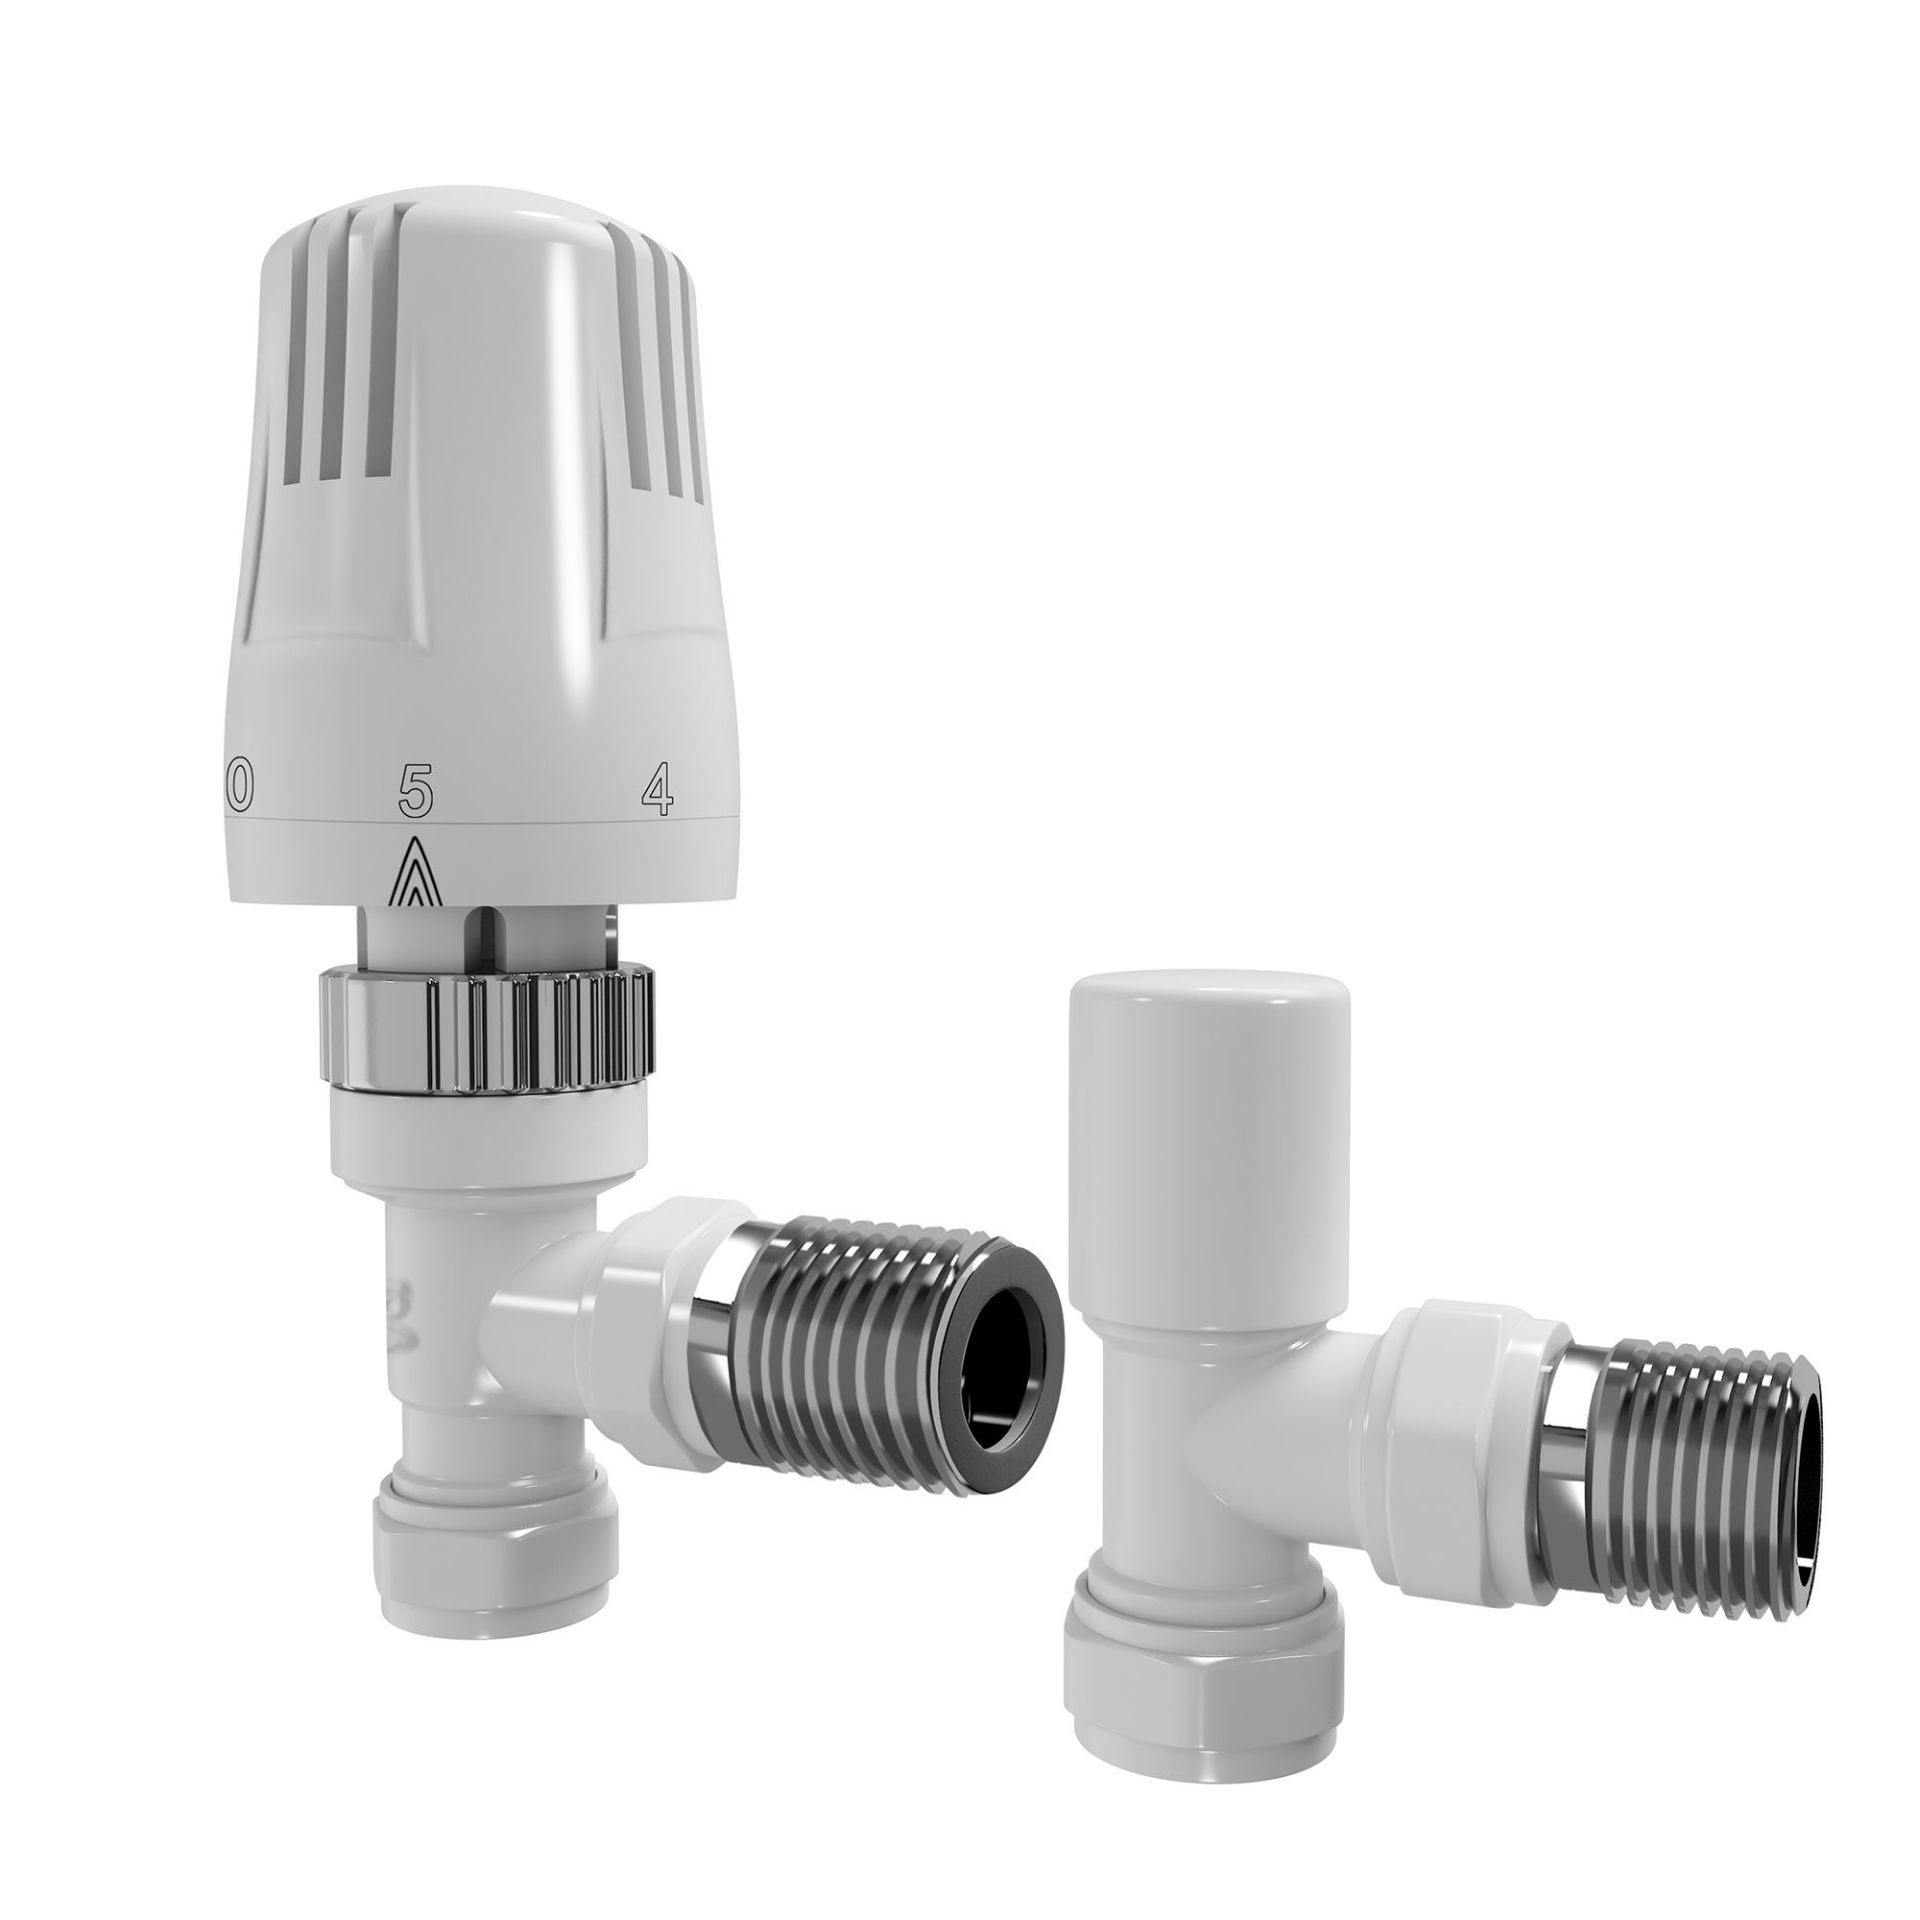 (VZ20) 15mm Standard Connection Thermostatic Angled Gloss White Radiator Valves Solid brass - Image 2 of 3